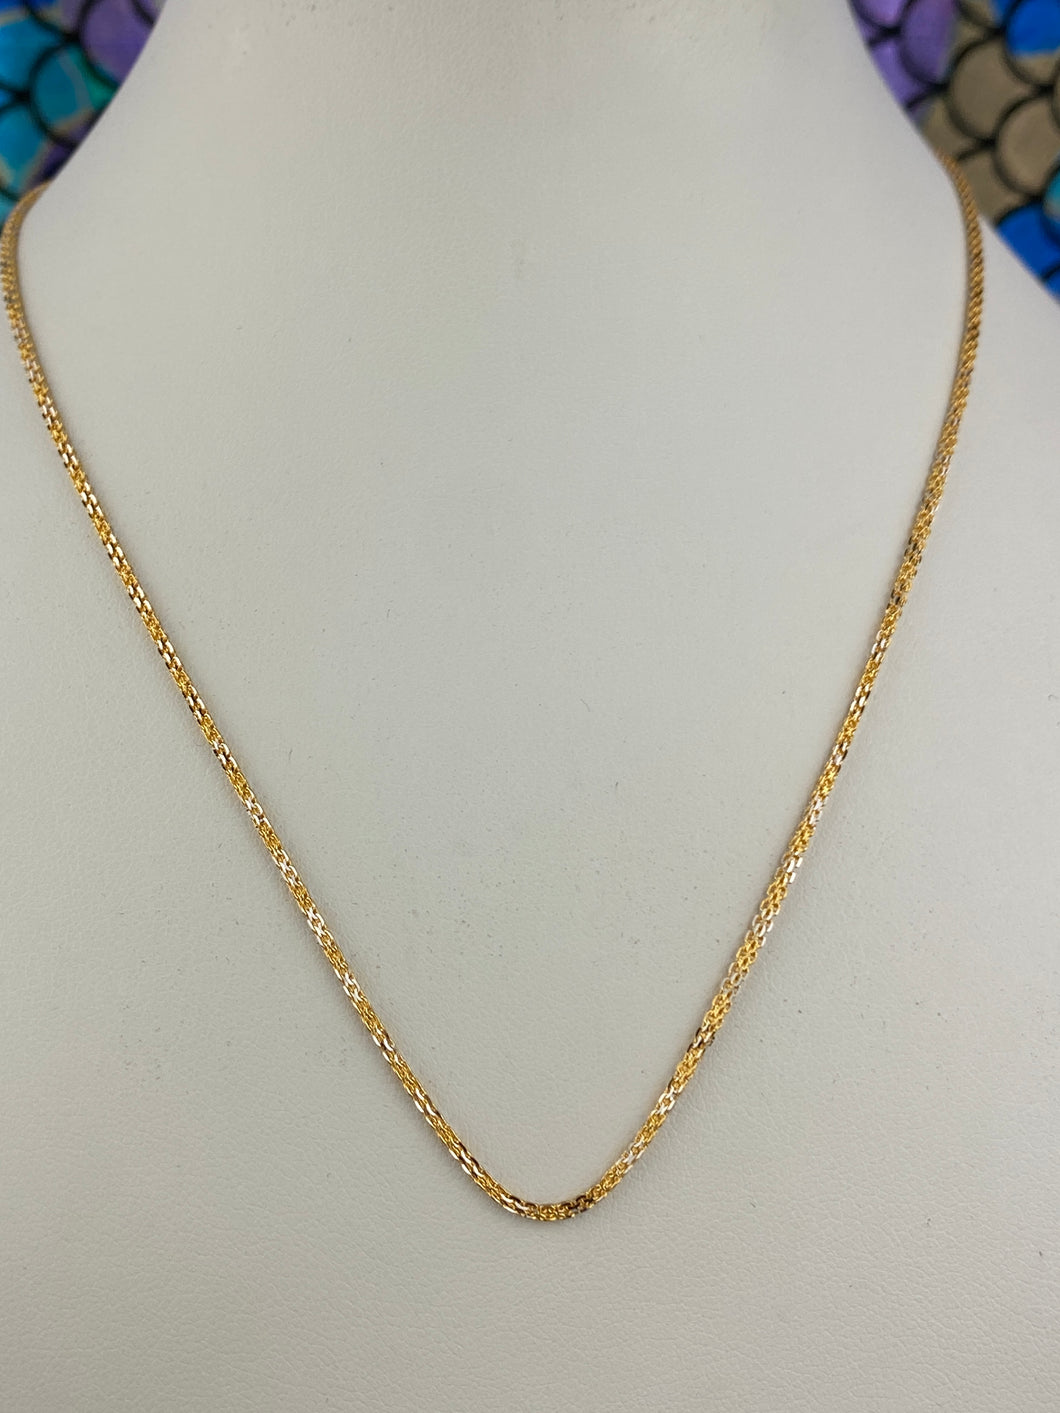 22k Chain Solid Gold Ladies Two tone Inter Connected Cable Design c0428 - Royal Dubai Jewellers